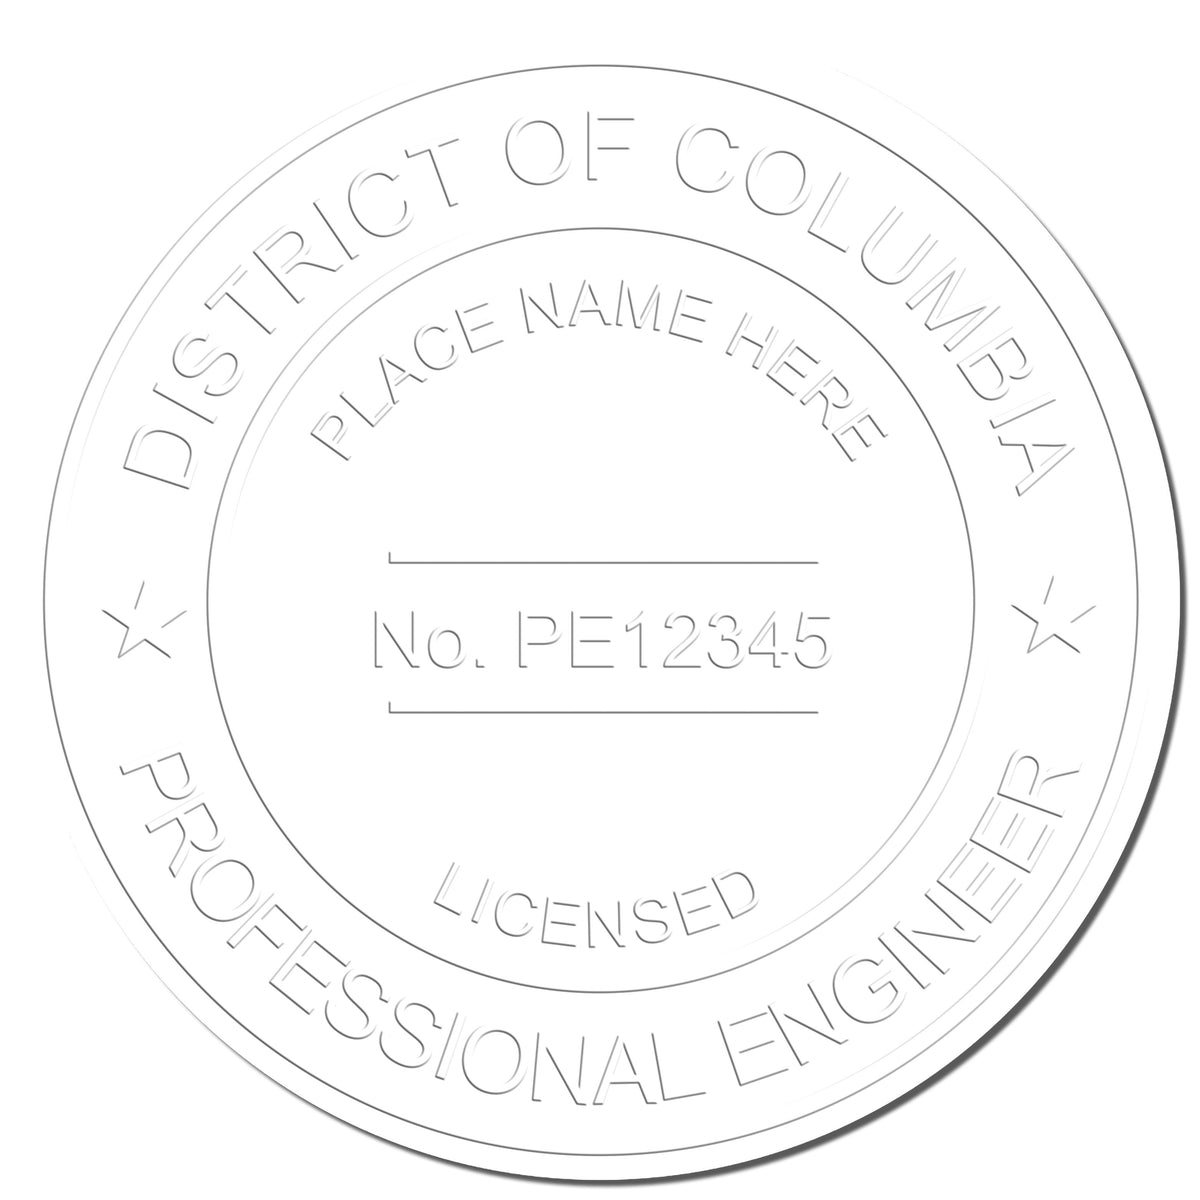 This paper is stamped with a sample imprint of the State of District of Columbia Extended Long Reach Engineer Seal, signifying its quality and reliability.